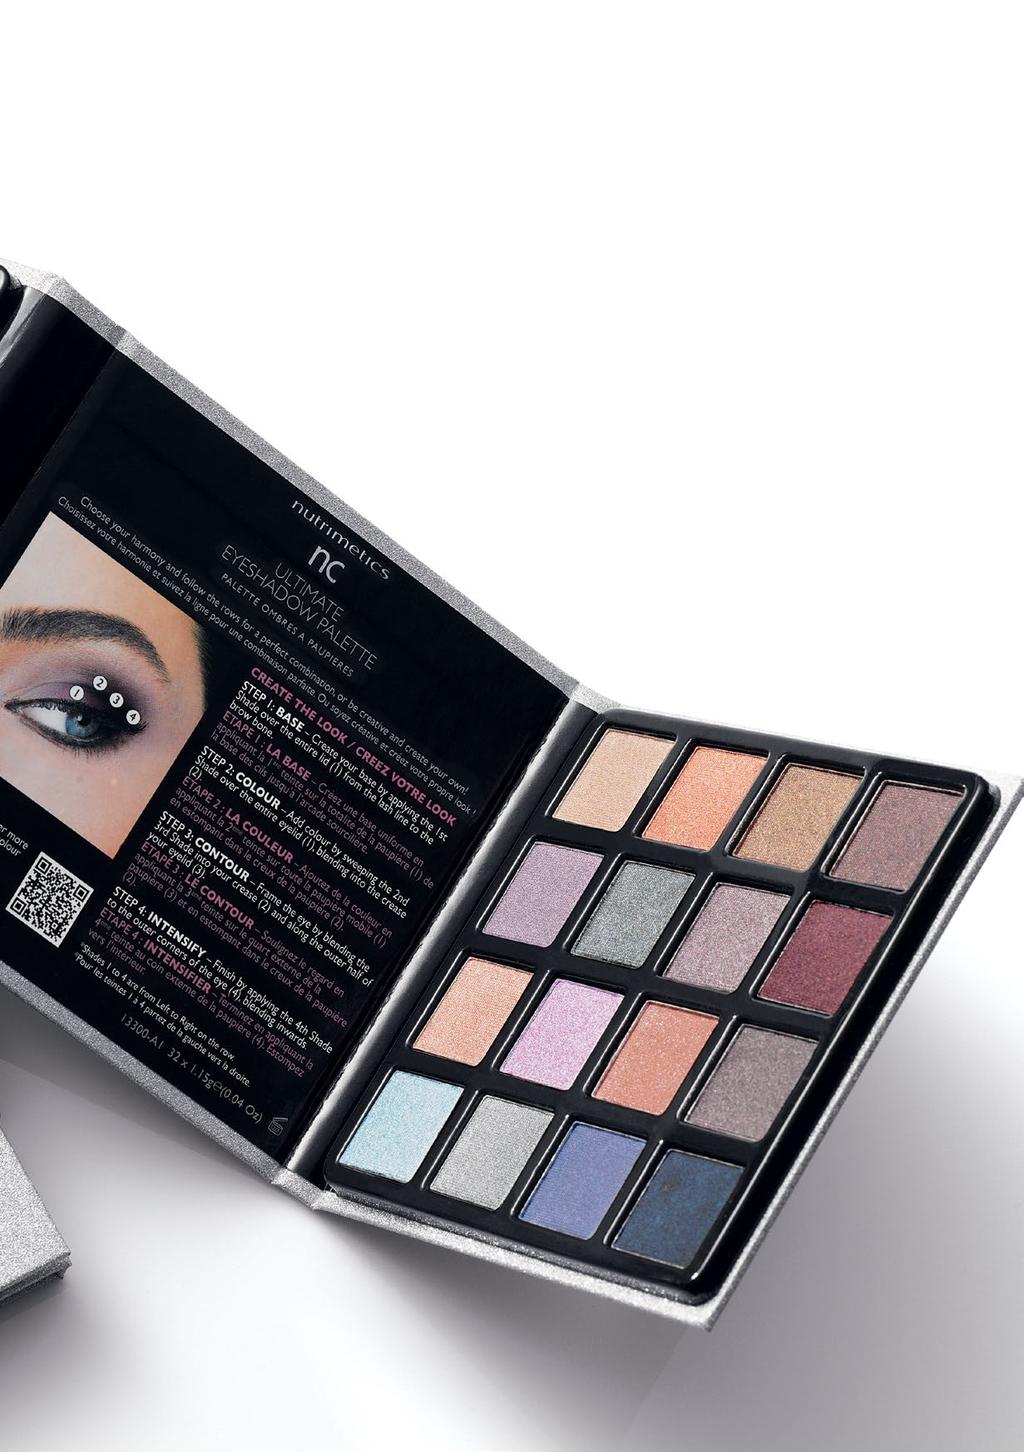 ONLY $26.90 With every $99.00 spend # NEW nc Ultimate Eyeshadow Palette* 36.8g $60.